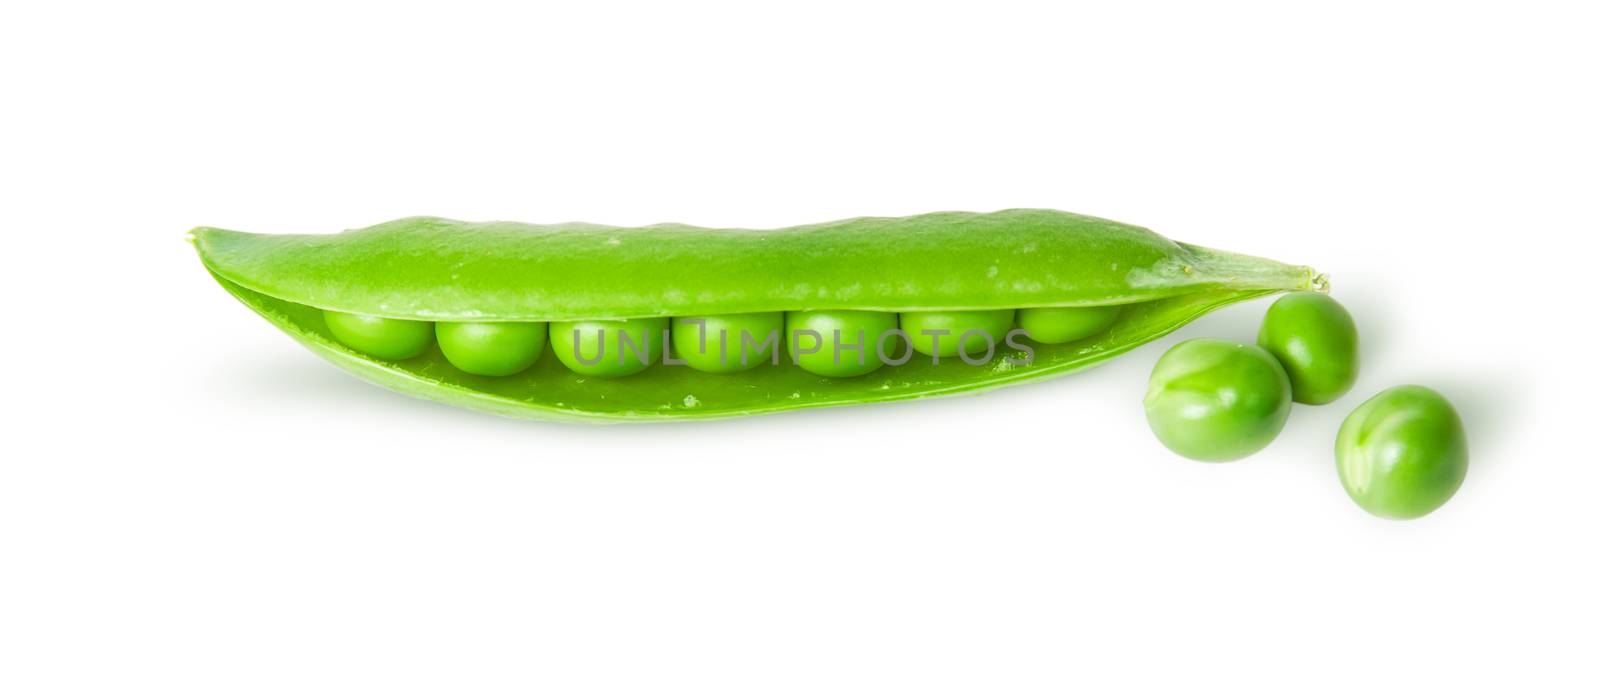 Opened green pea pod and peas top view by Cipariss